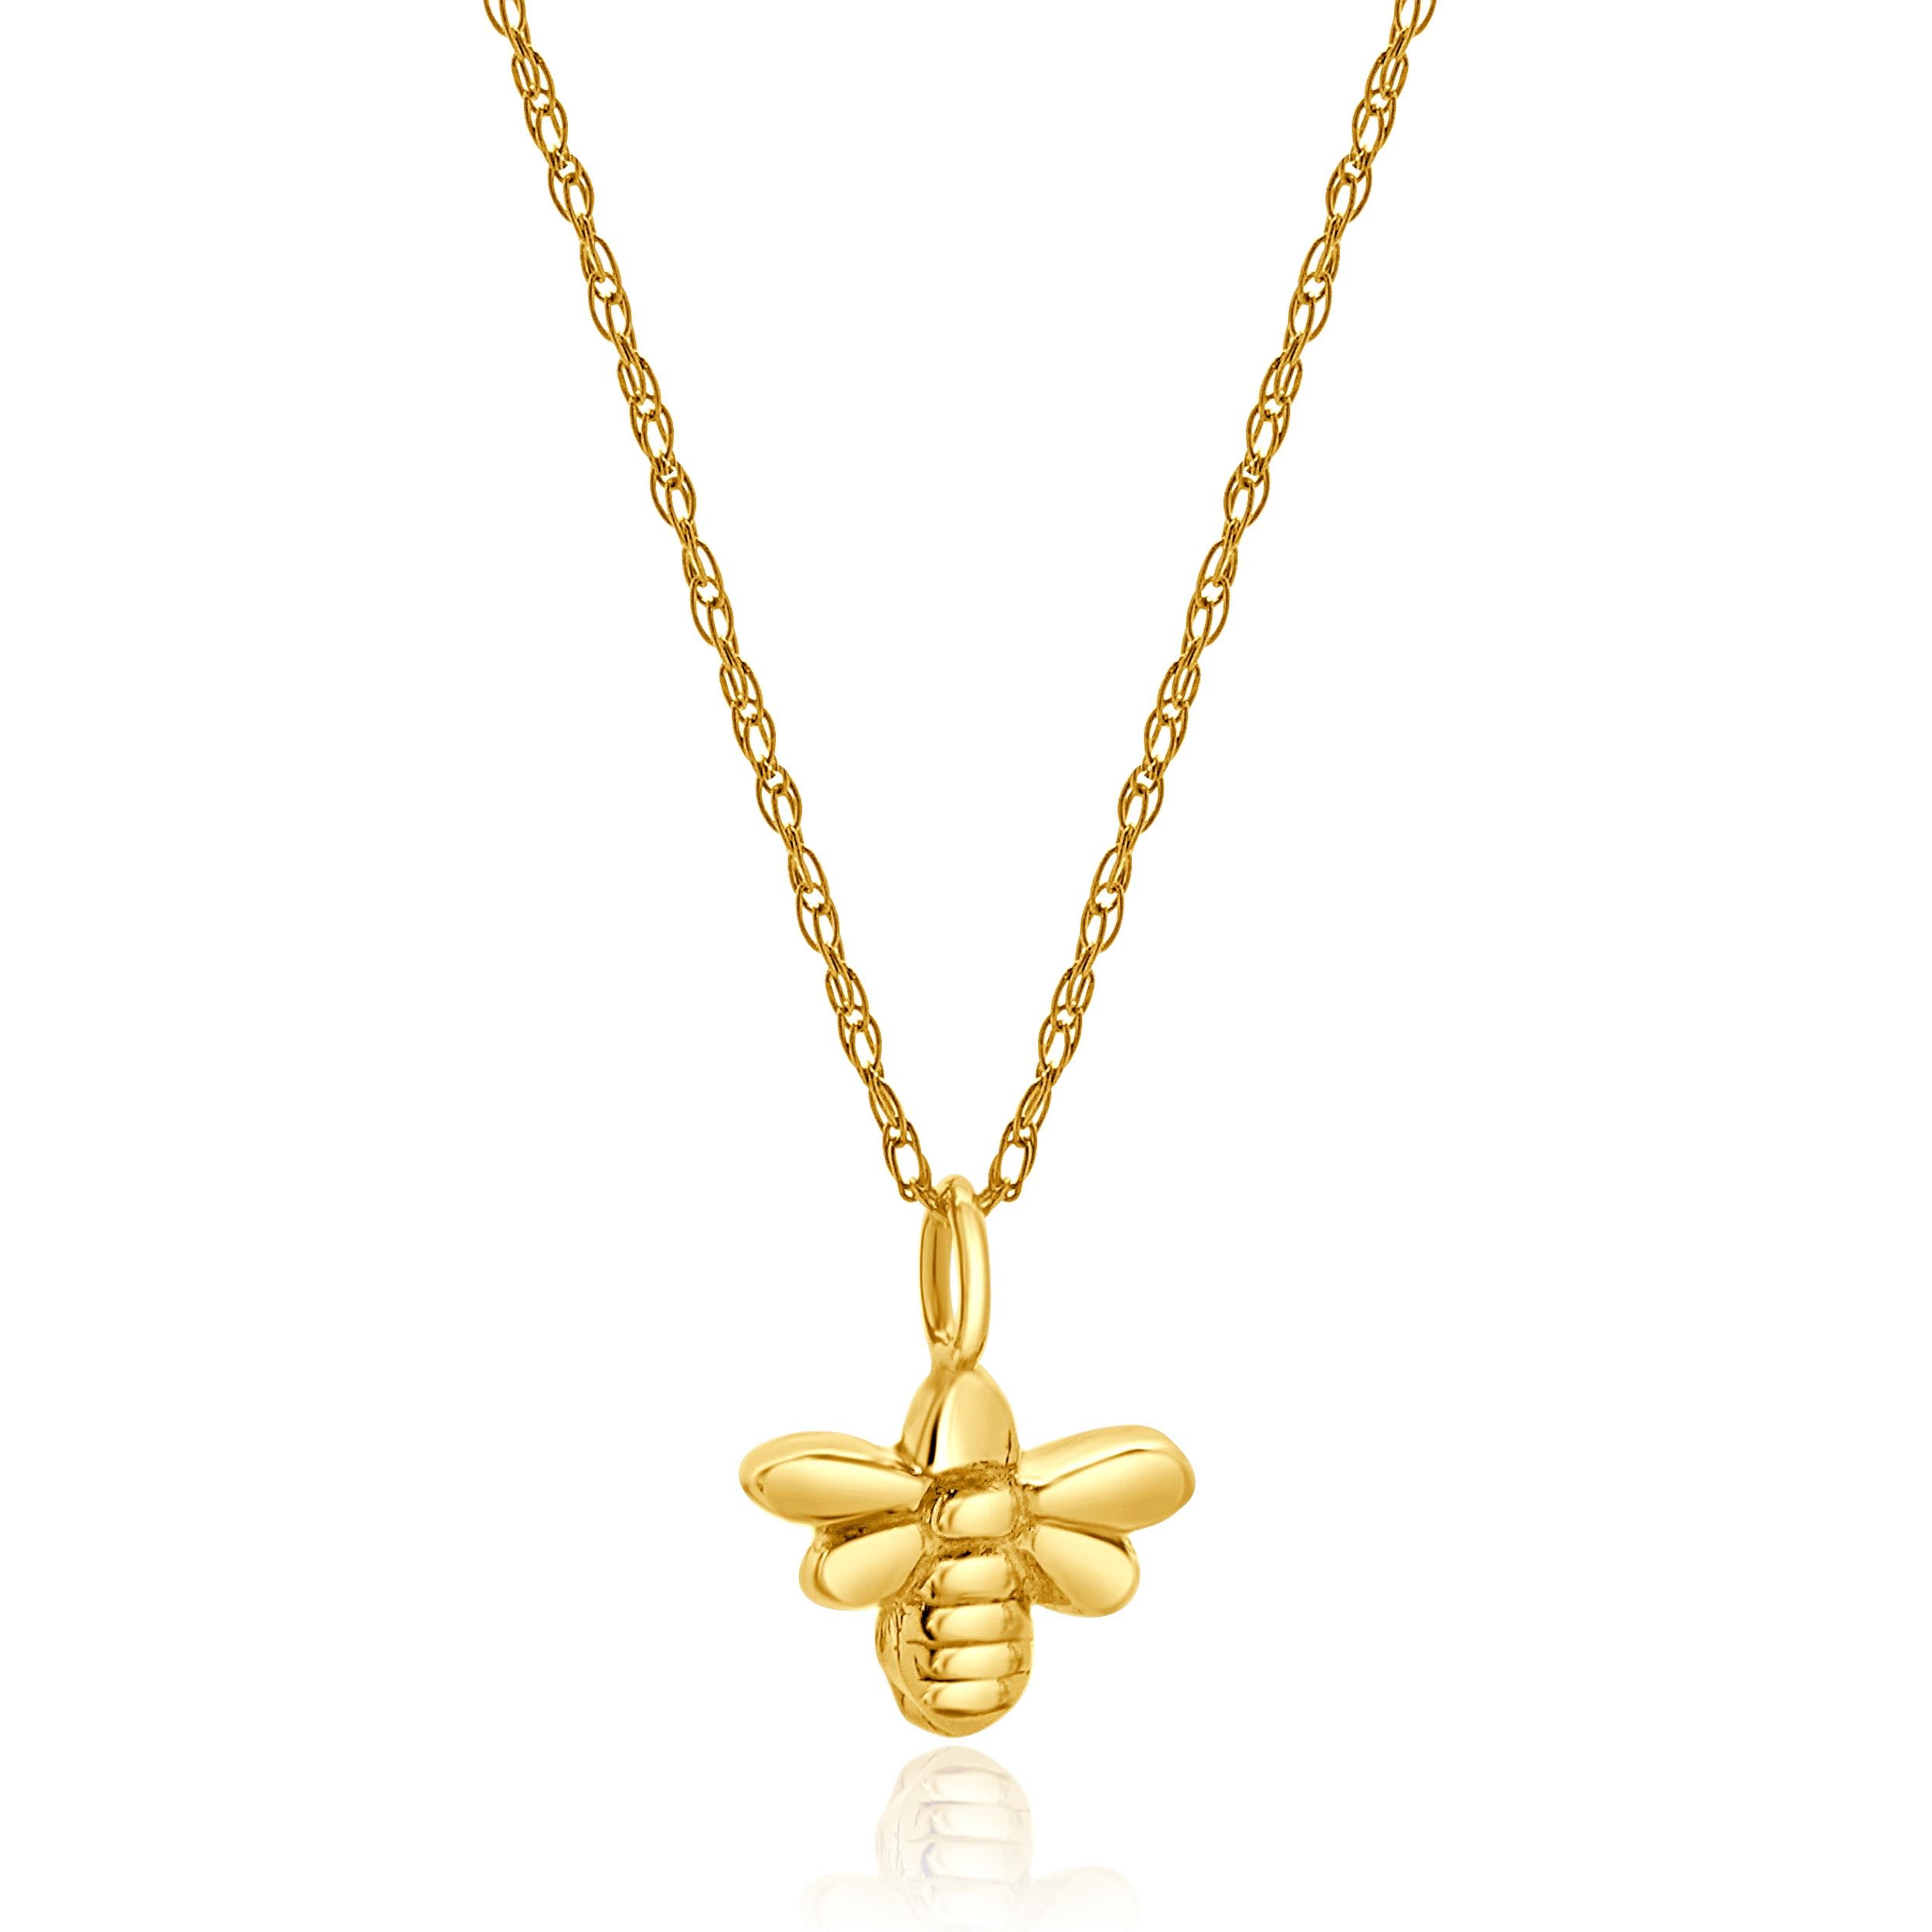 Designer: custom
Material: 14K yellow gold 
Dimensions: necklace measures 18-inches in length
Weight: 1.70 grams